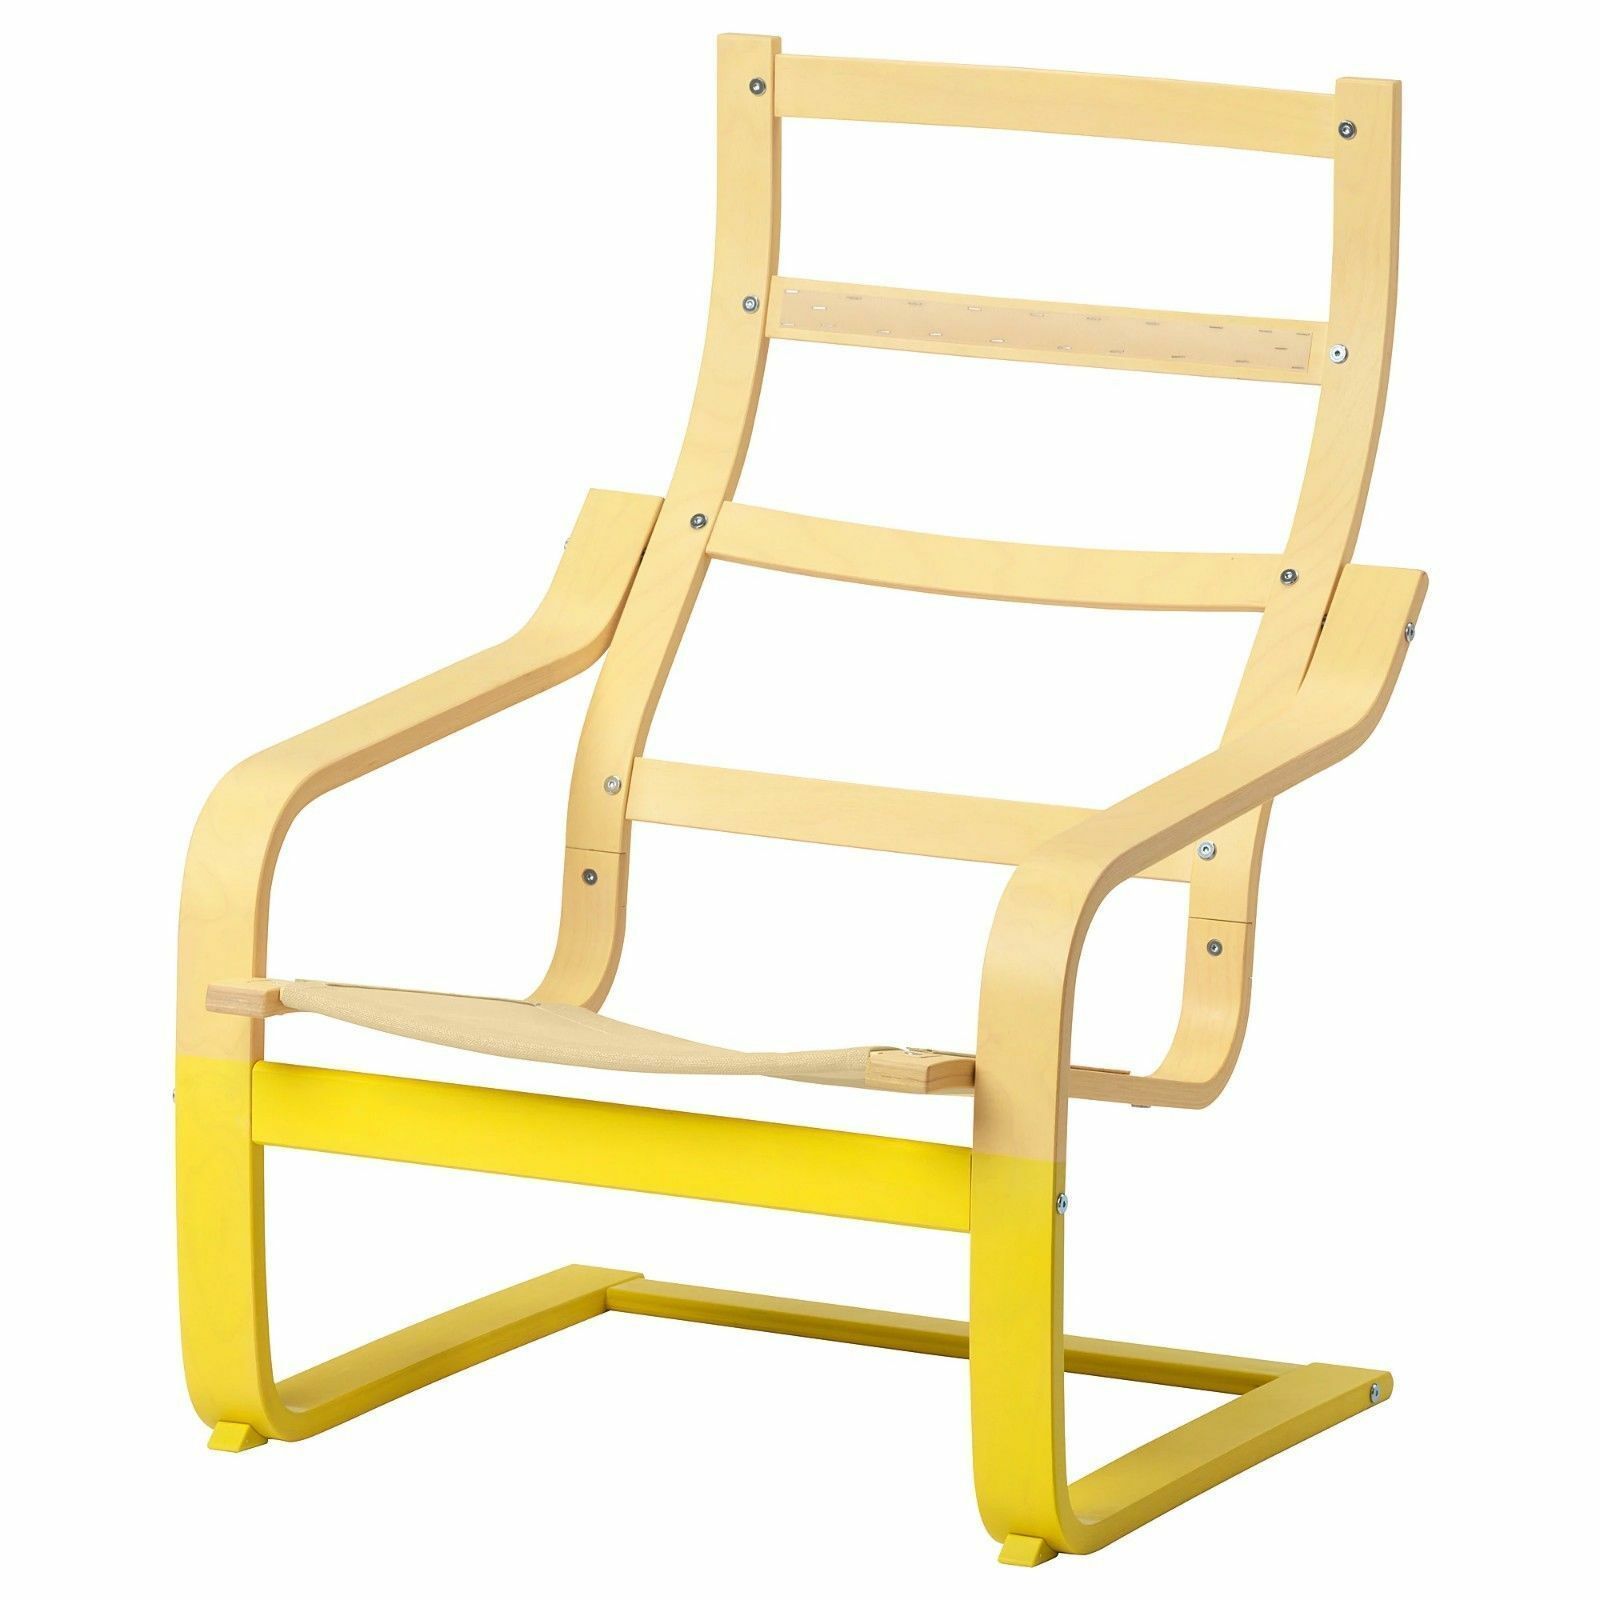 IKEA POANG Armchair Frame, Yellow, 803.833.30 - NEW IN BOX - Chairs